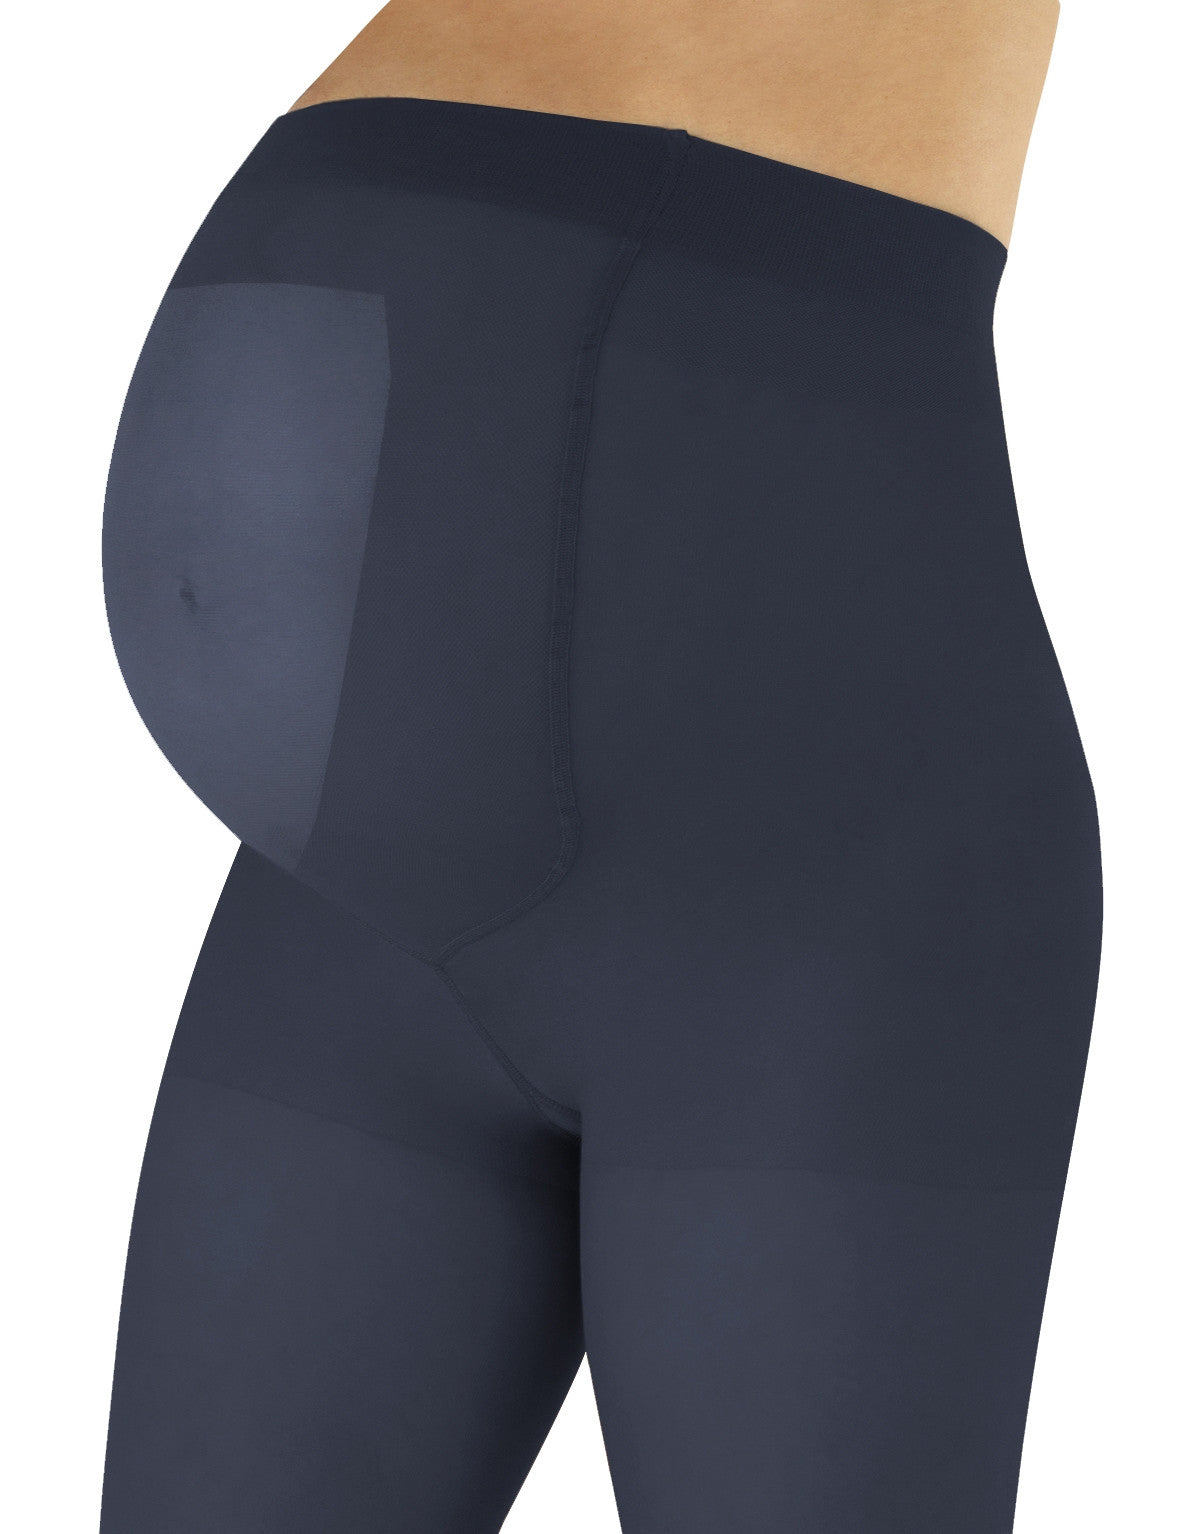 Calzitaly 100 Den Maternity Tights - Denim blue ultra opaque pregnancy tights with an extra panel and flat seam.